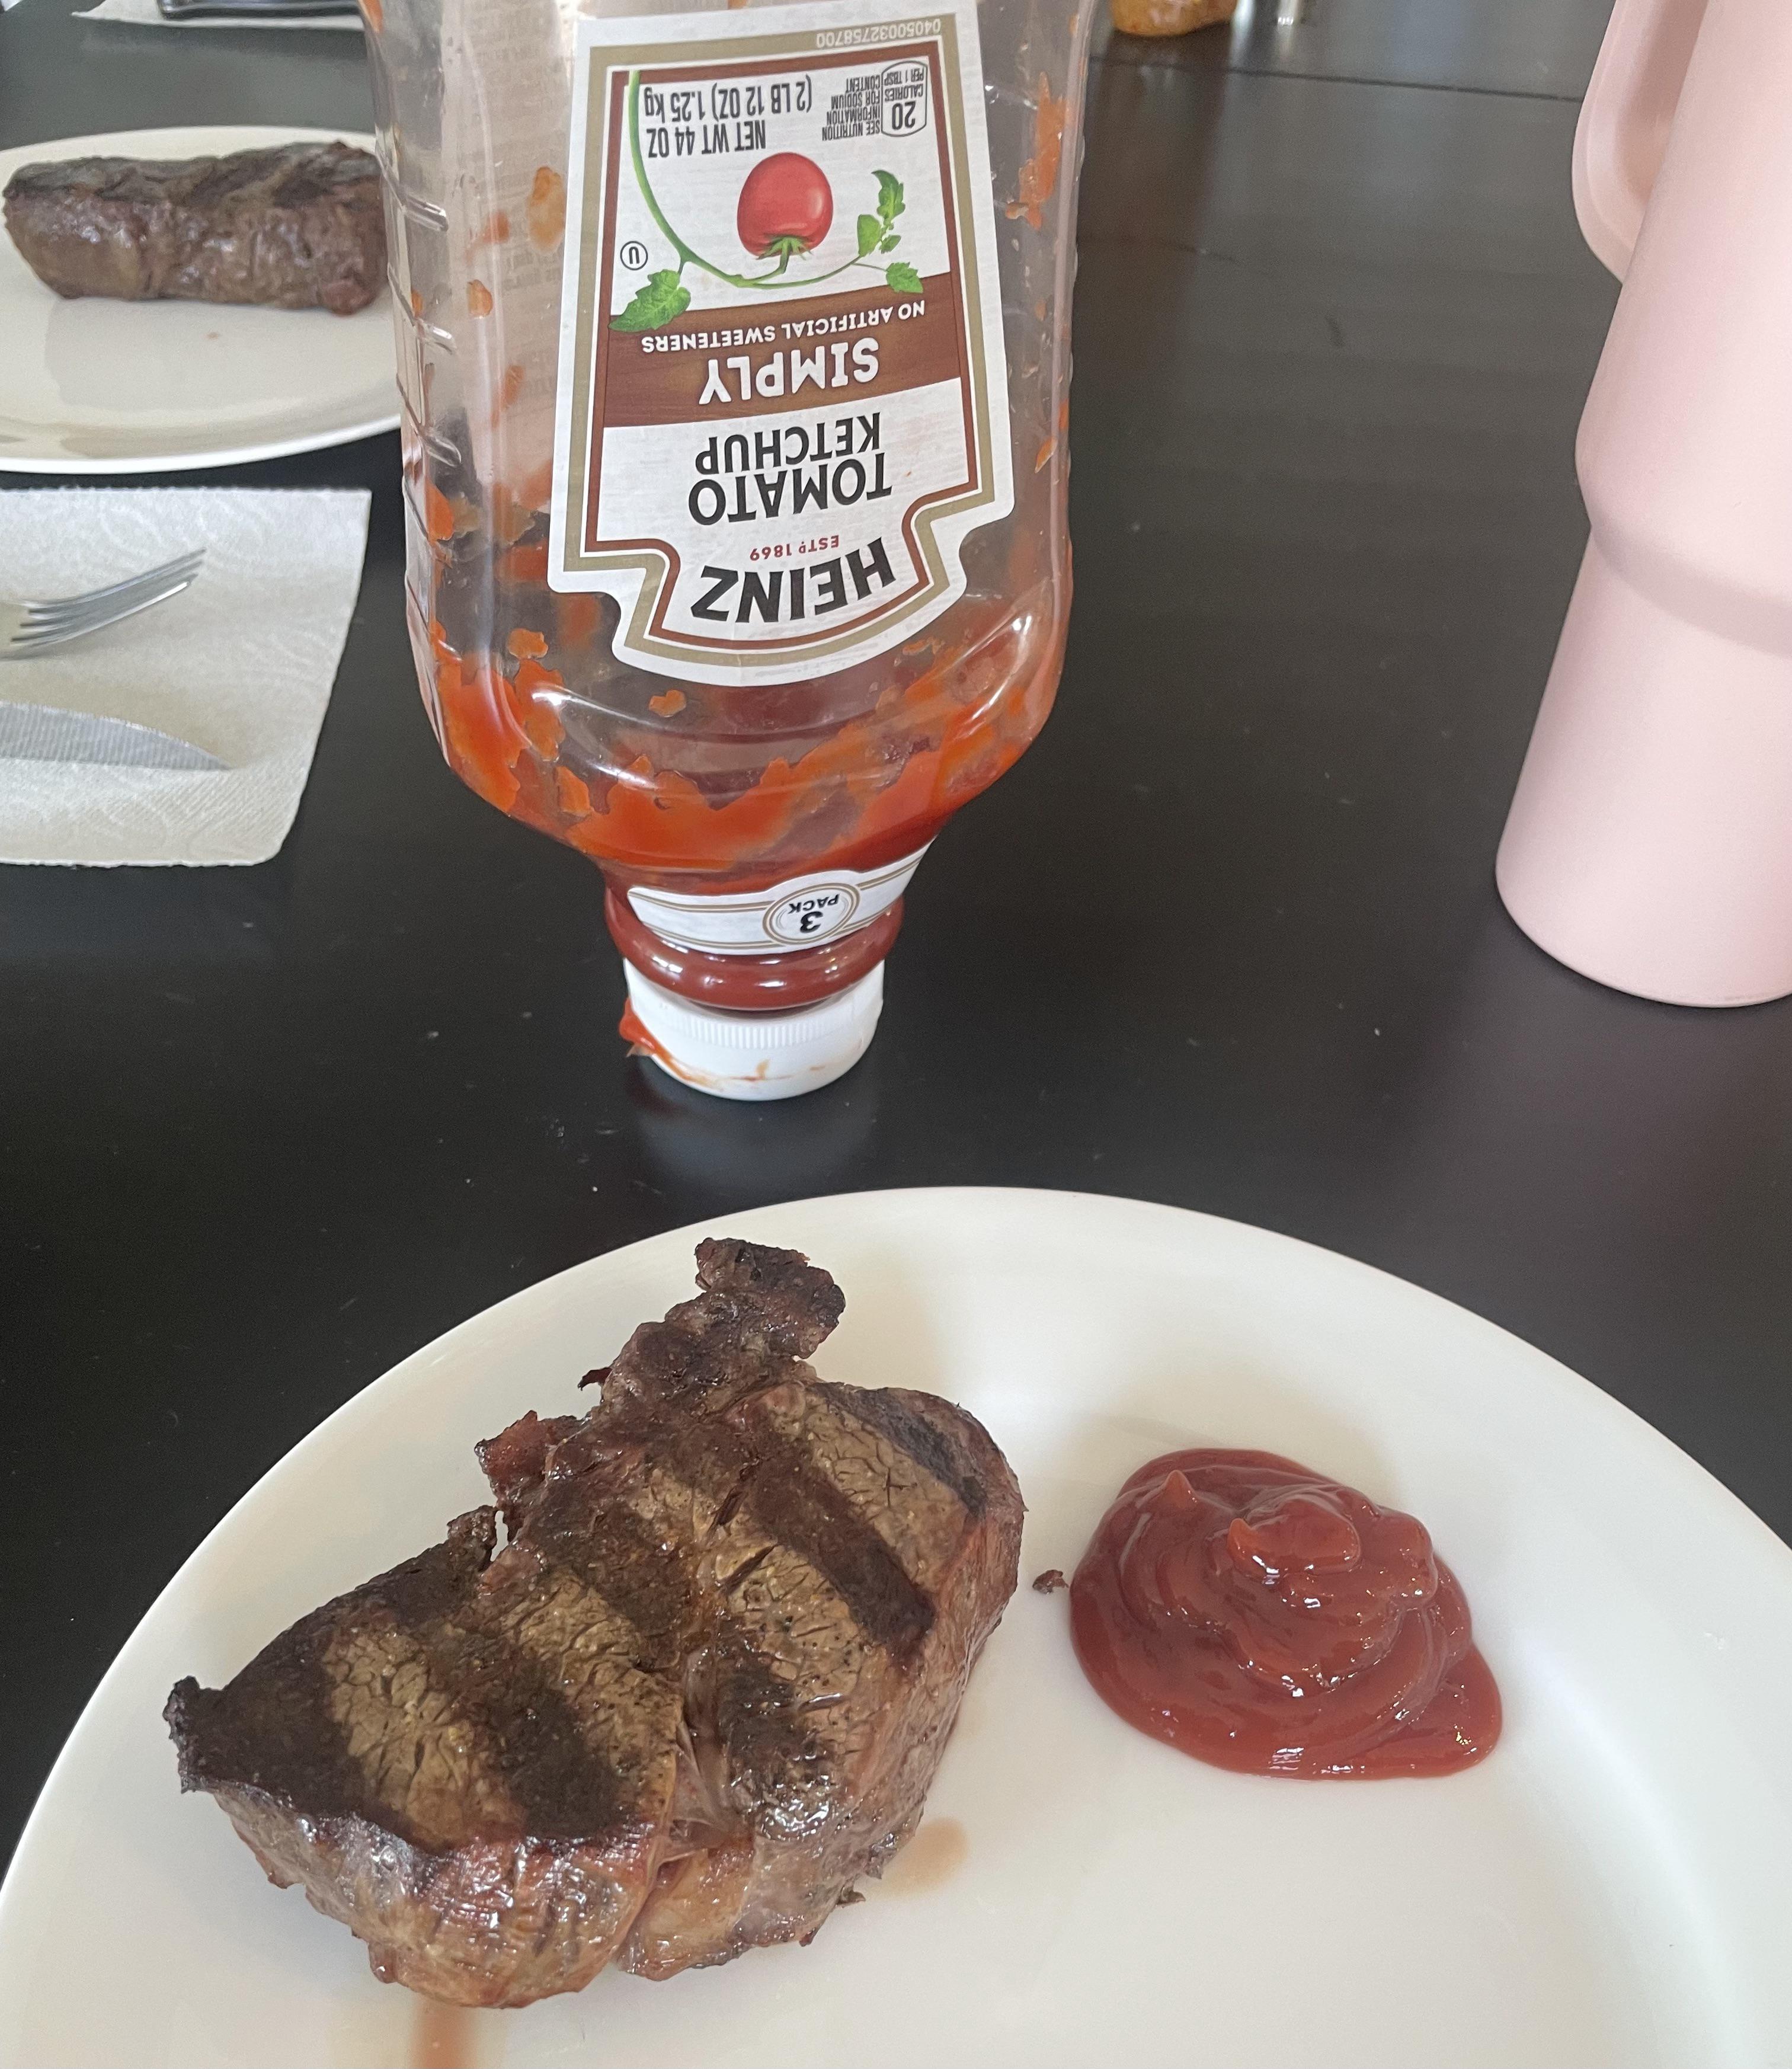 My adult daughter dips her prime fillet mignon in ketchup.